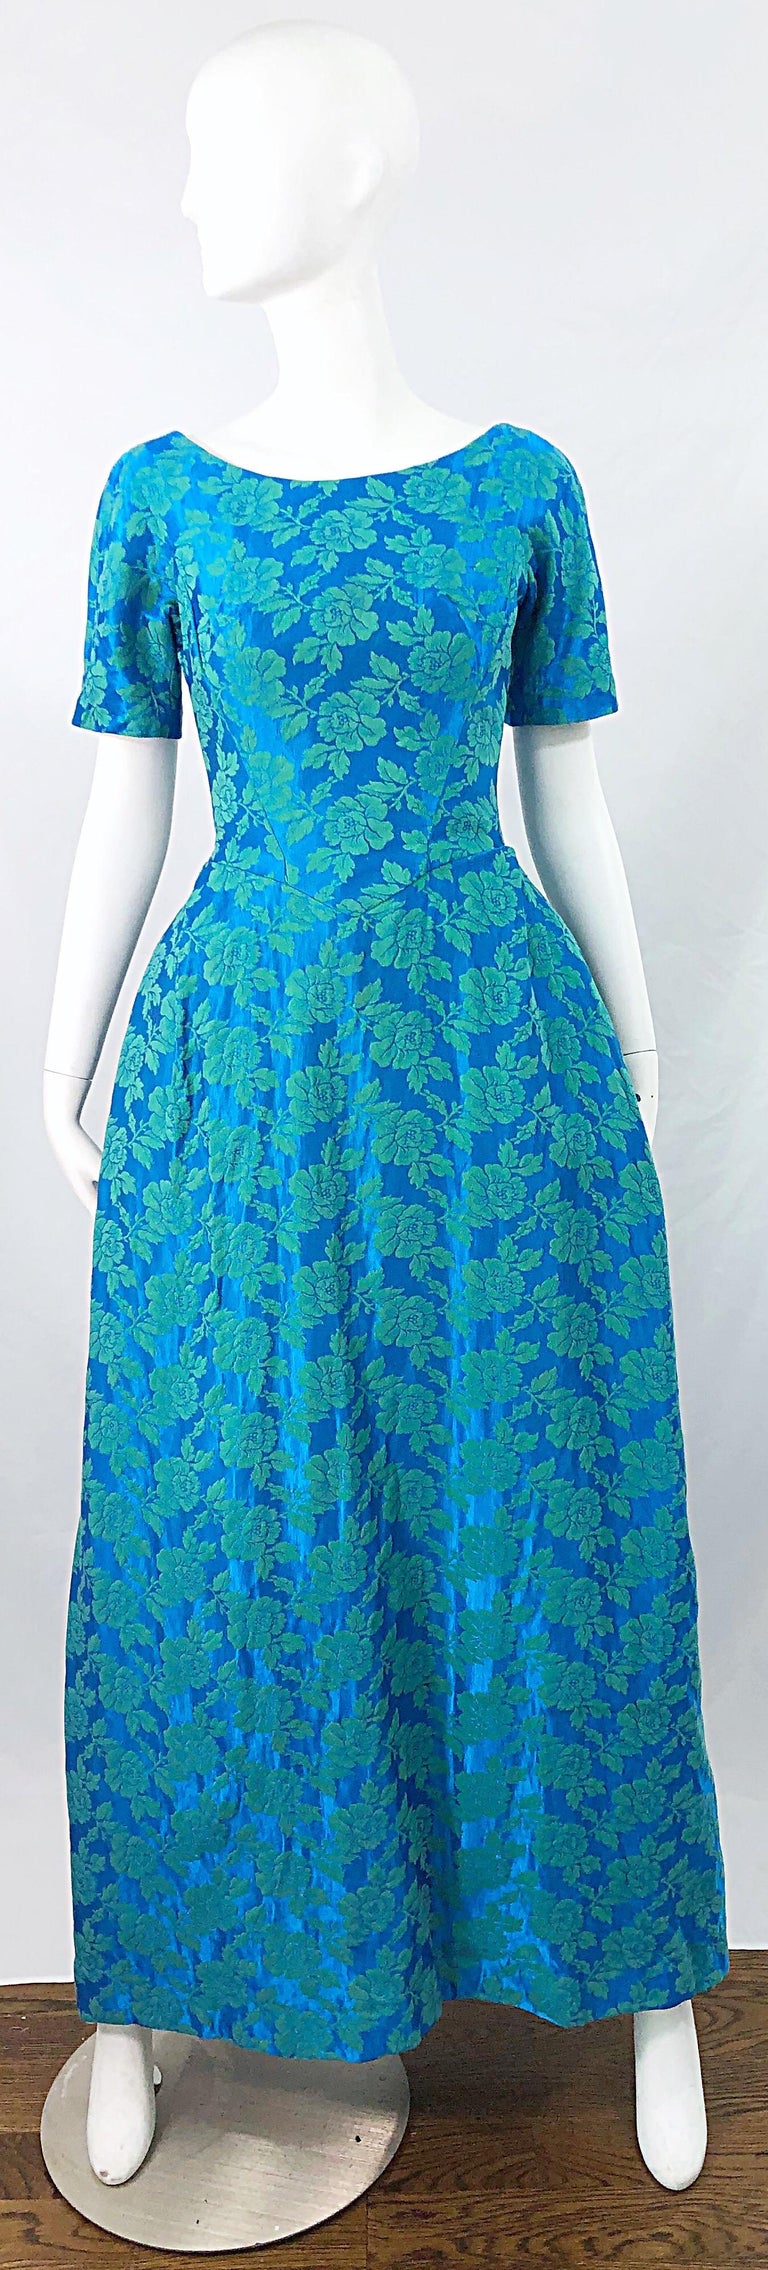 Gorgeous mid 1950s HOUSE OF BIANCHI turquoise blue silk brocade short sleeve gown / dress ! Features a vibrant turquoise blue silk with lighter green / blue flower brocade throughout. Tailored bodice with a full forgiving skirt. Full metal zipper up